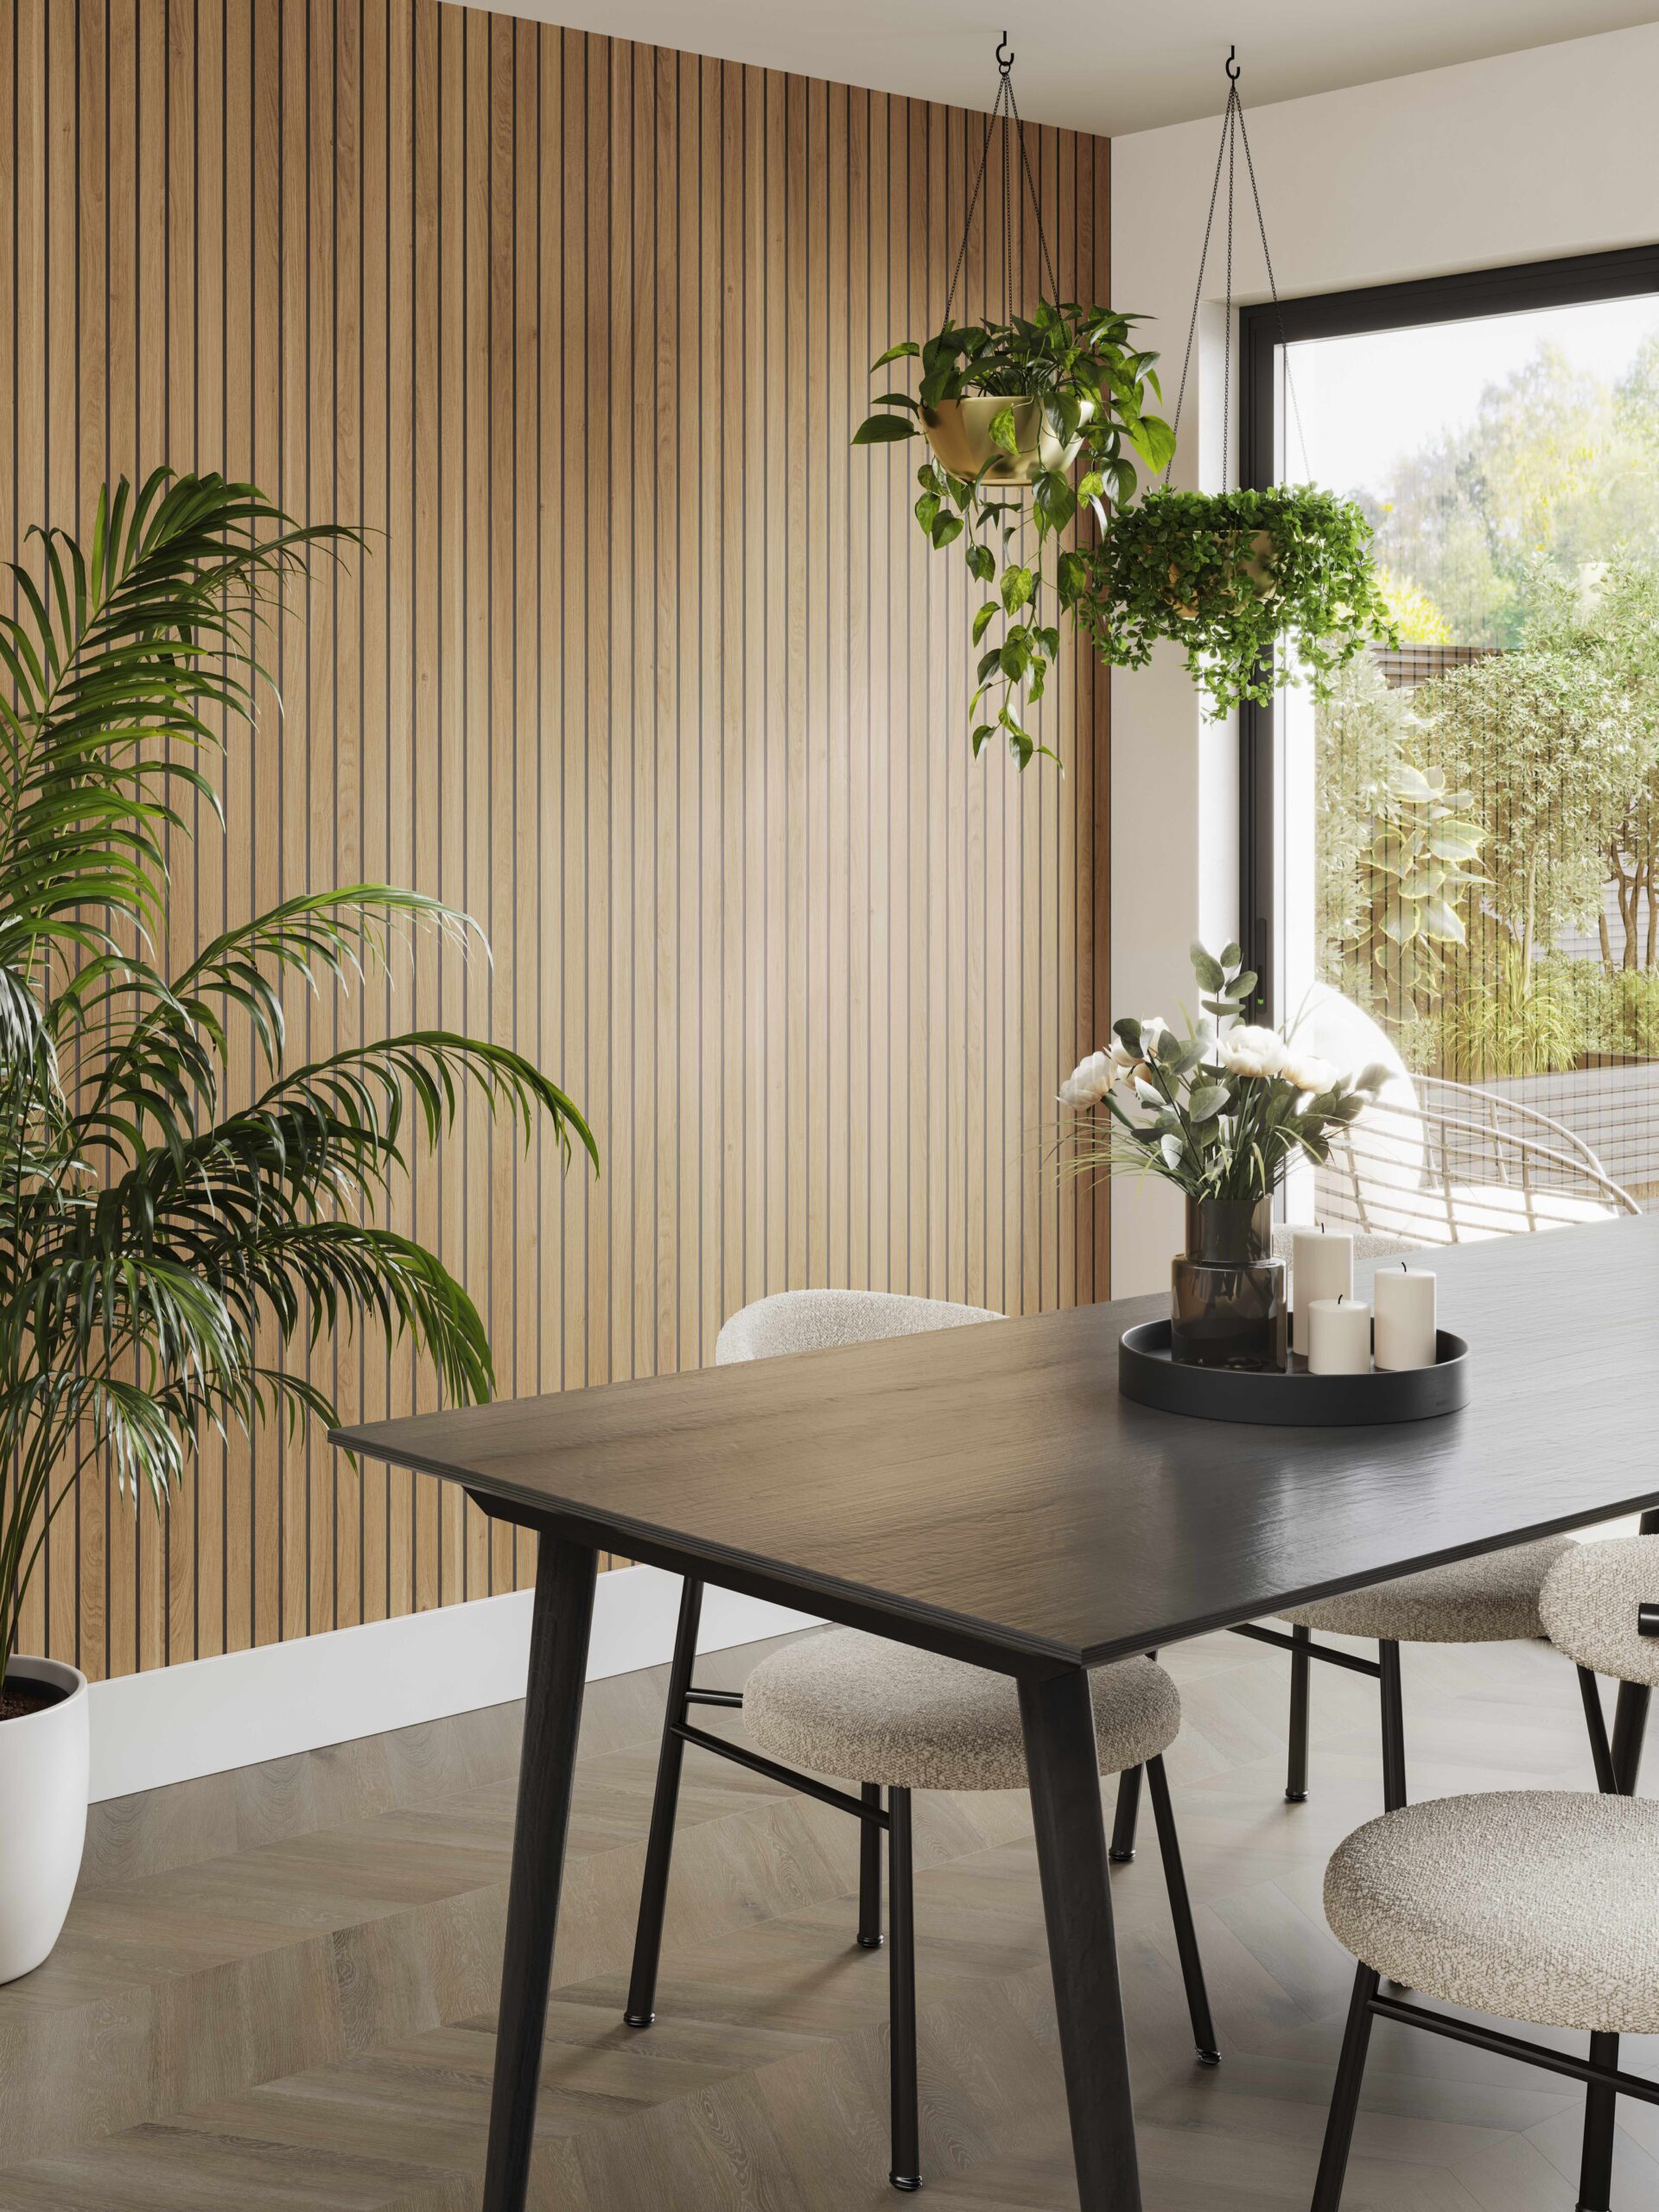 GRANT WESTFIELD ANNOUNCES LAUNCH OF NATUREPANEL   – NEW NATURE-INSPIRED PANEL BRAND